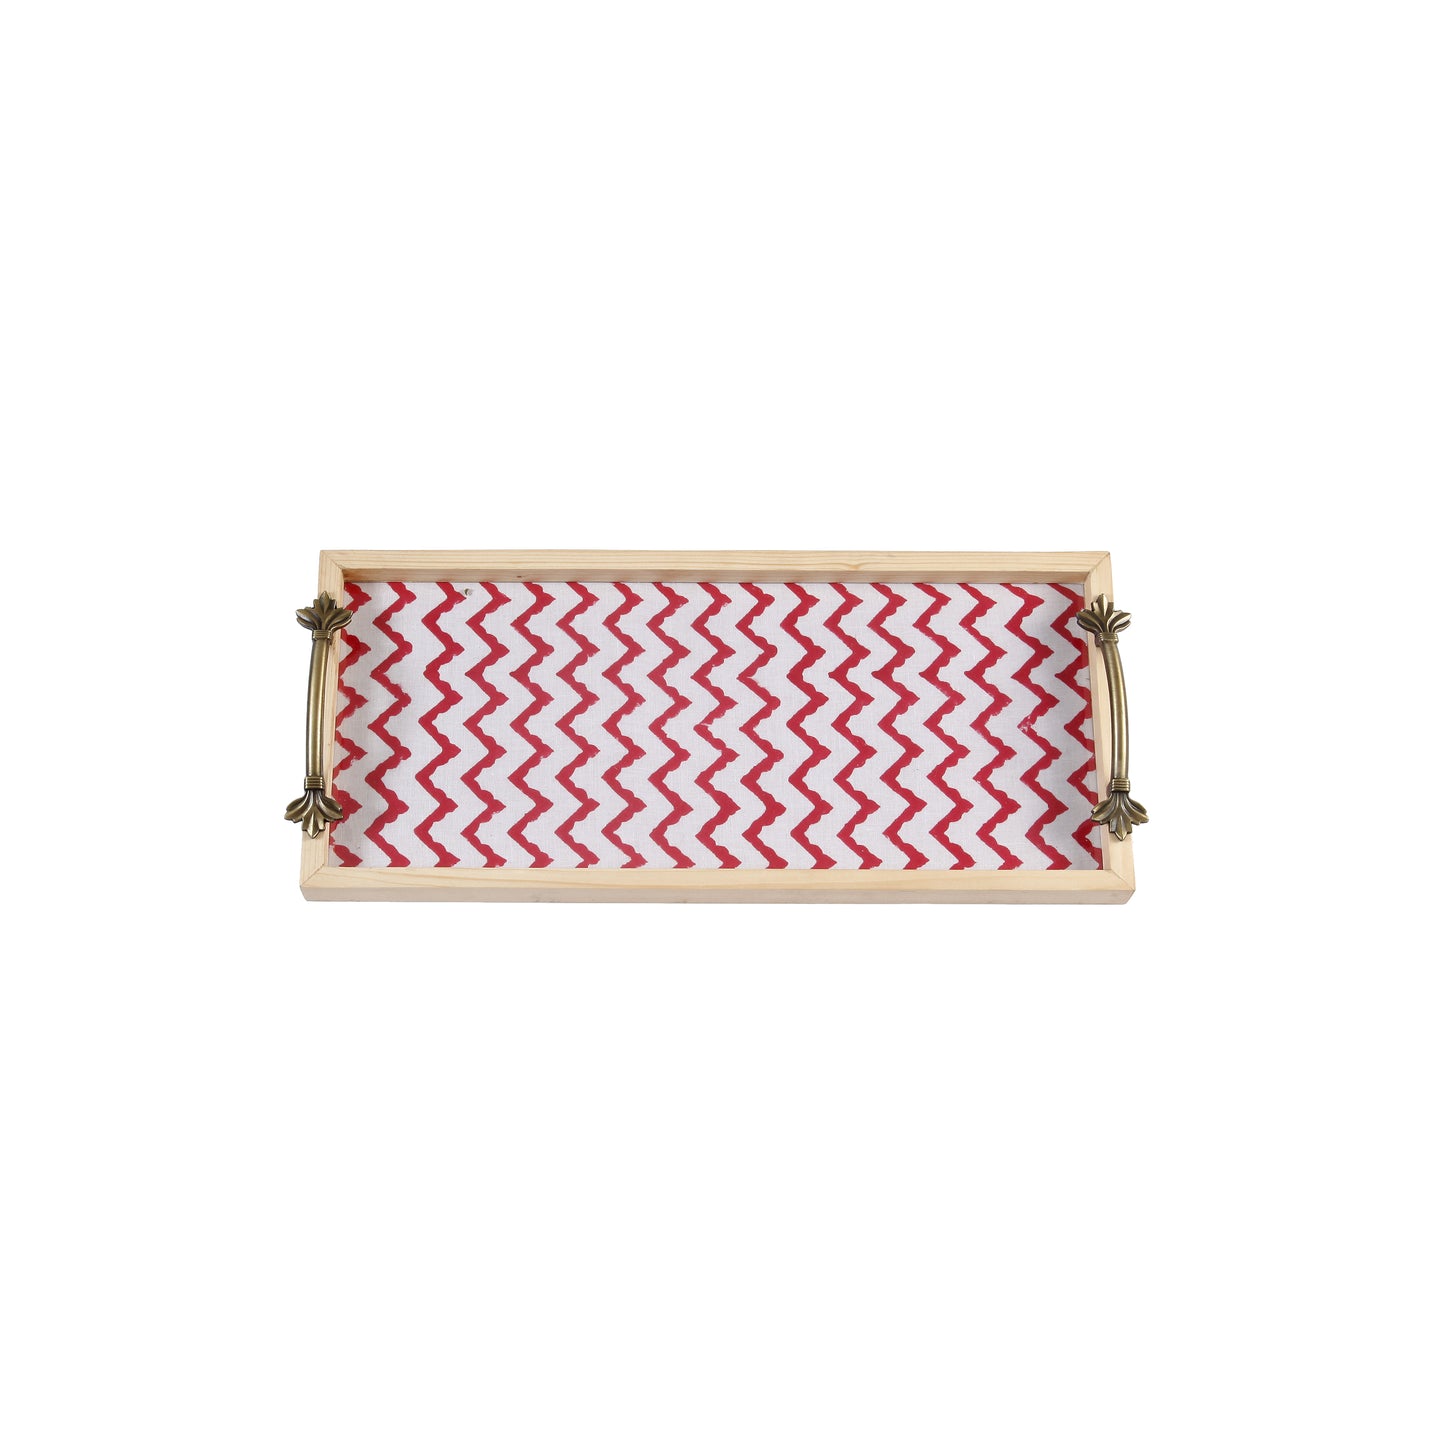 A Tiny Mistake Red Chevron Pine Tray with Handle Serving Pine Wood Tray